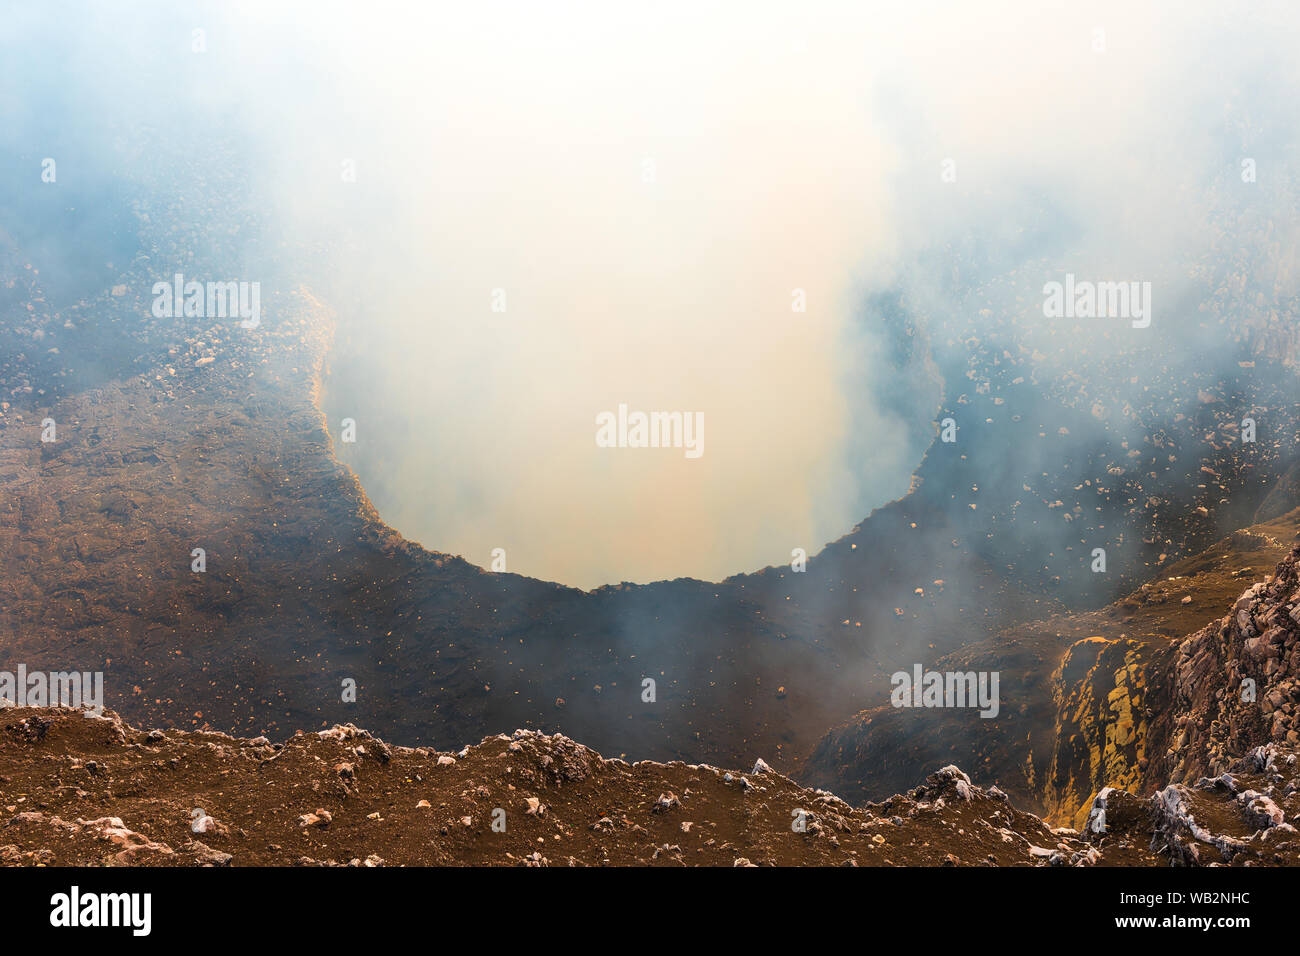 The active volcanic crater of the Masaya volcano with its gas emissions (sulfur dioxide) at sunset located between Managua and Granada, Nicaragua. Stock Photo